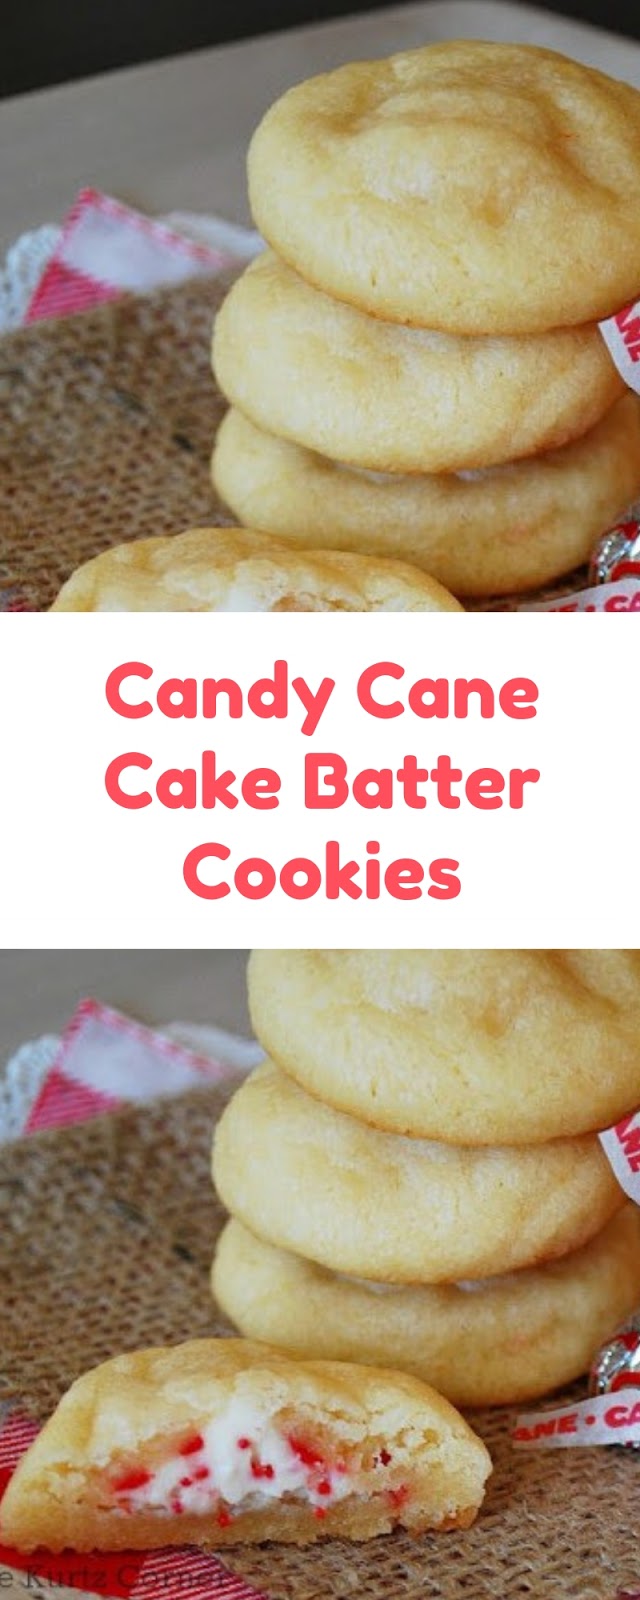 Candy Cane Cake Batter Cookies